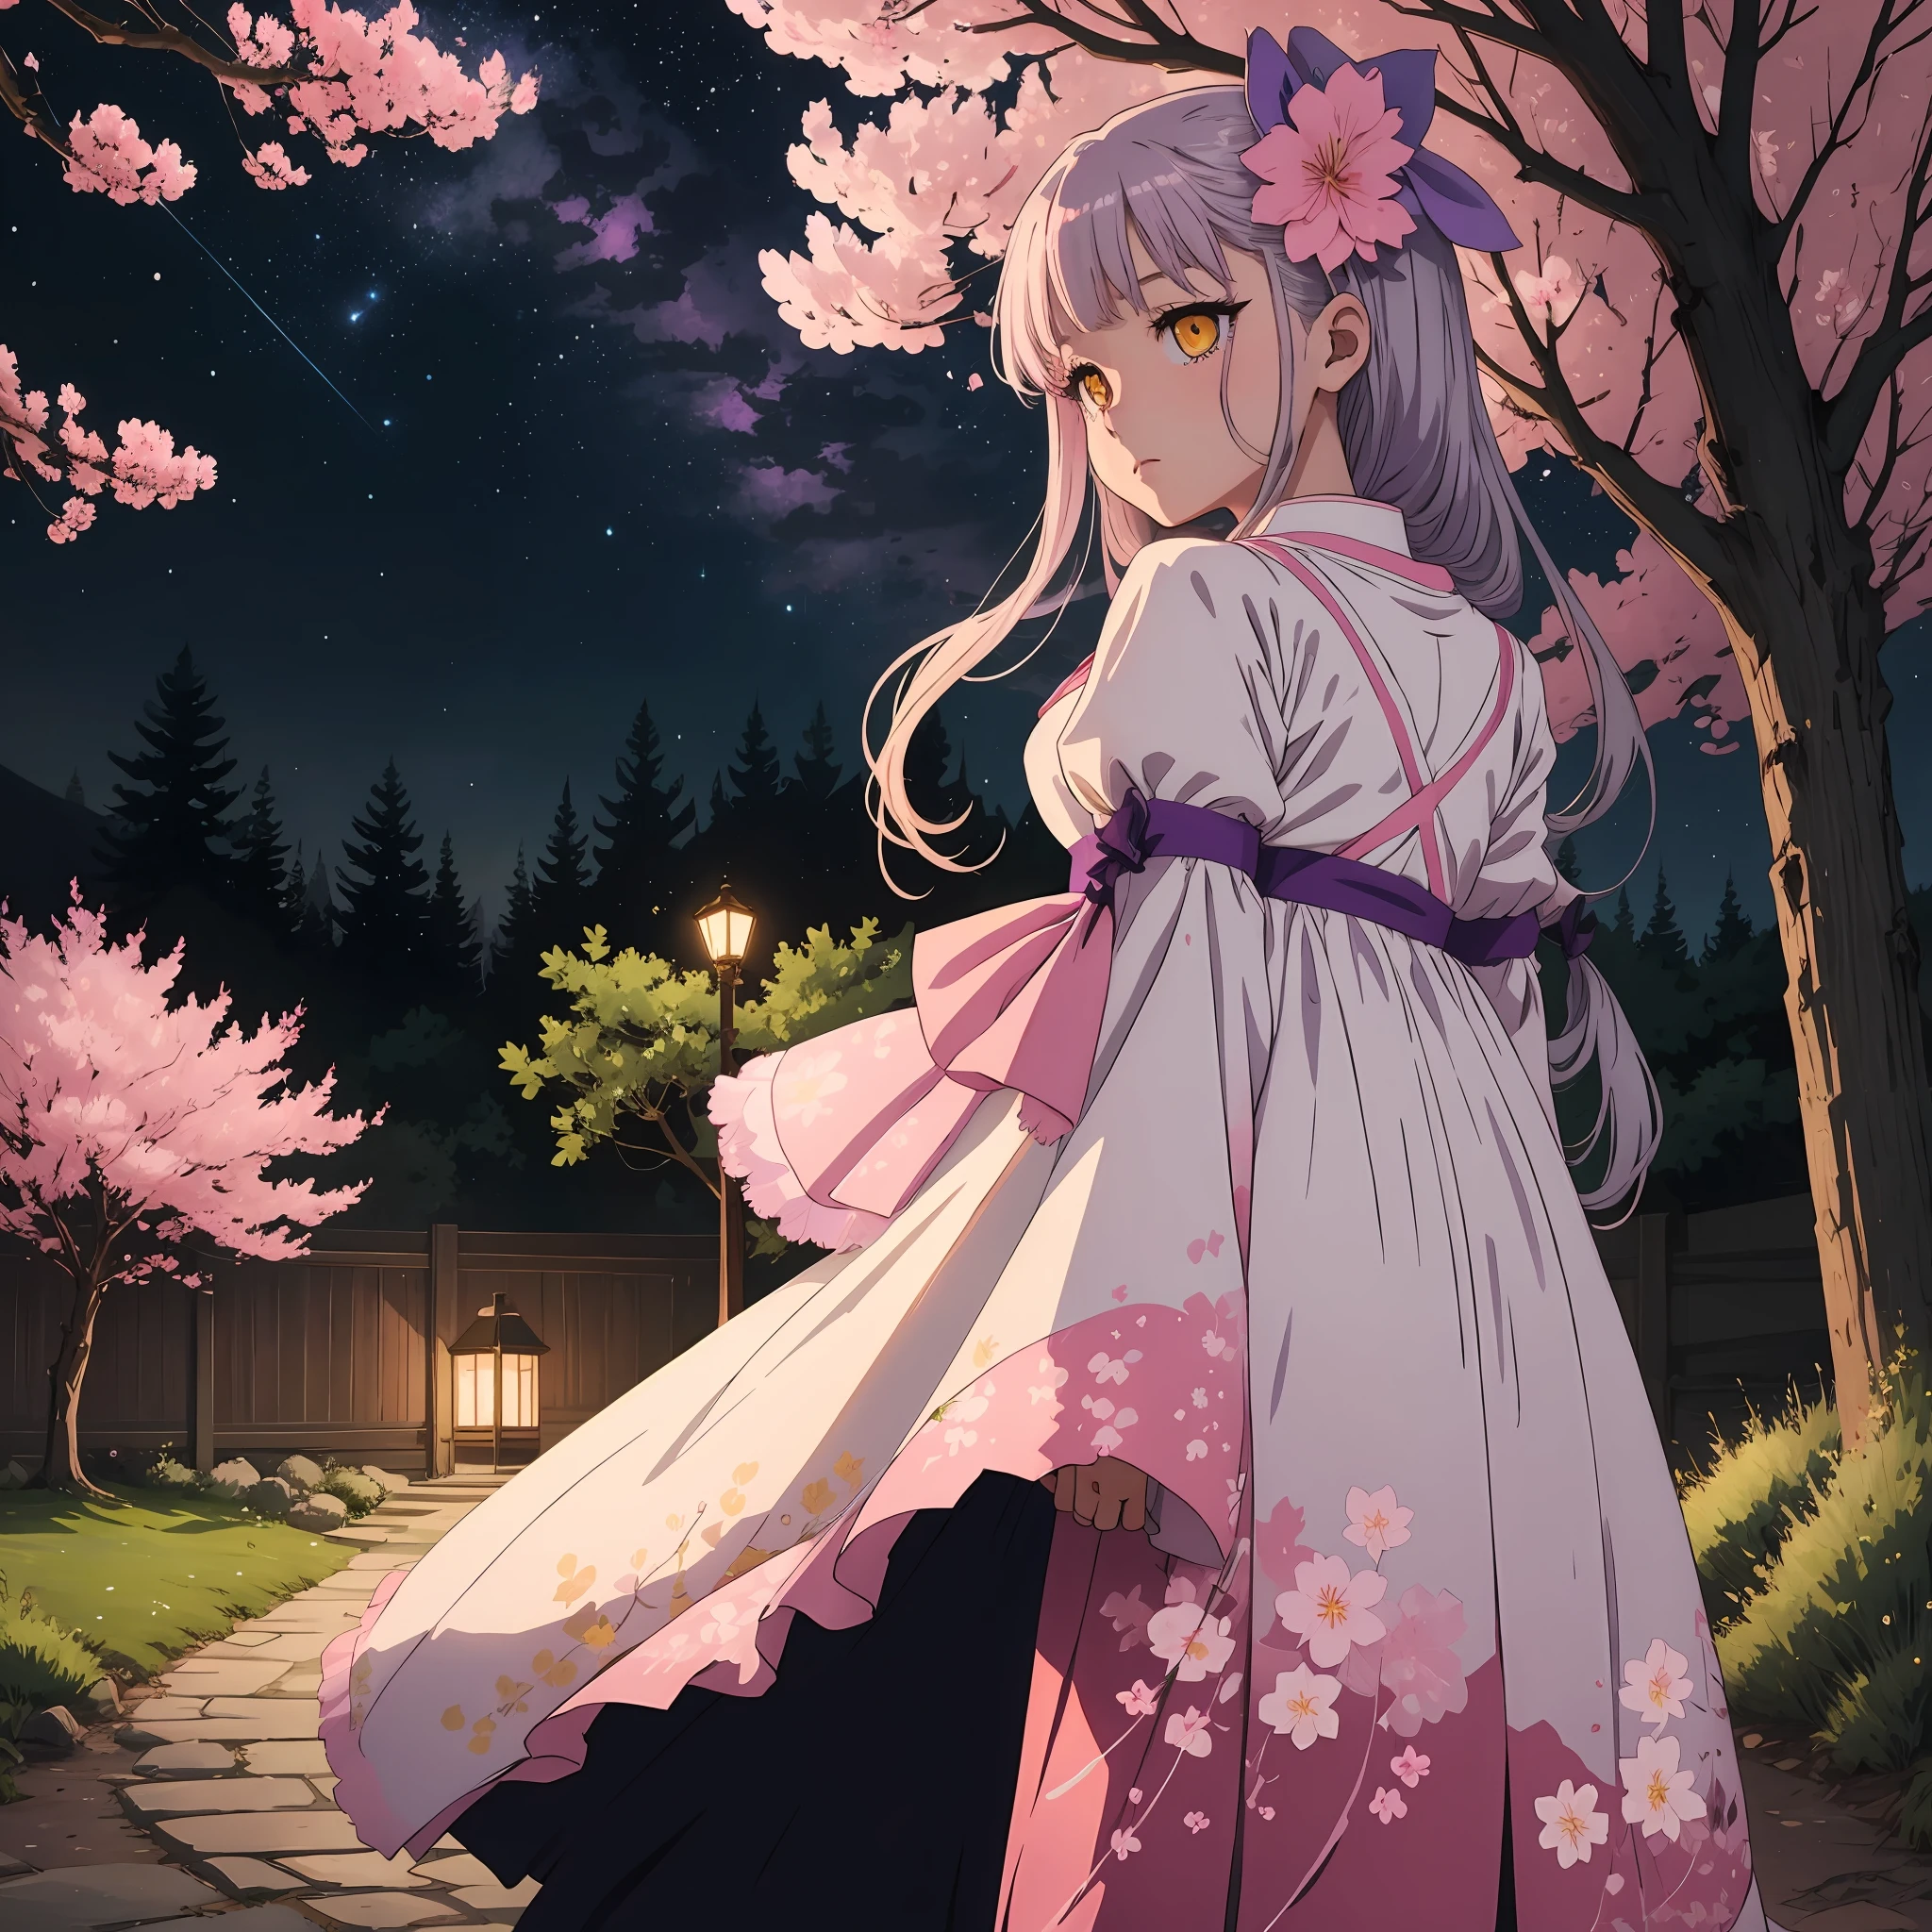 One Silver haired anime girl with bright yellow eyes and pink Sakura in her hair wearing lavender tule dress standing under starry night sky alone by herself surrounded by Sakura trees --auto